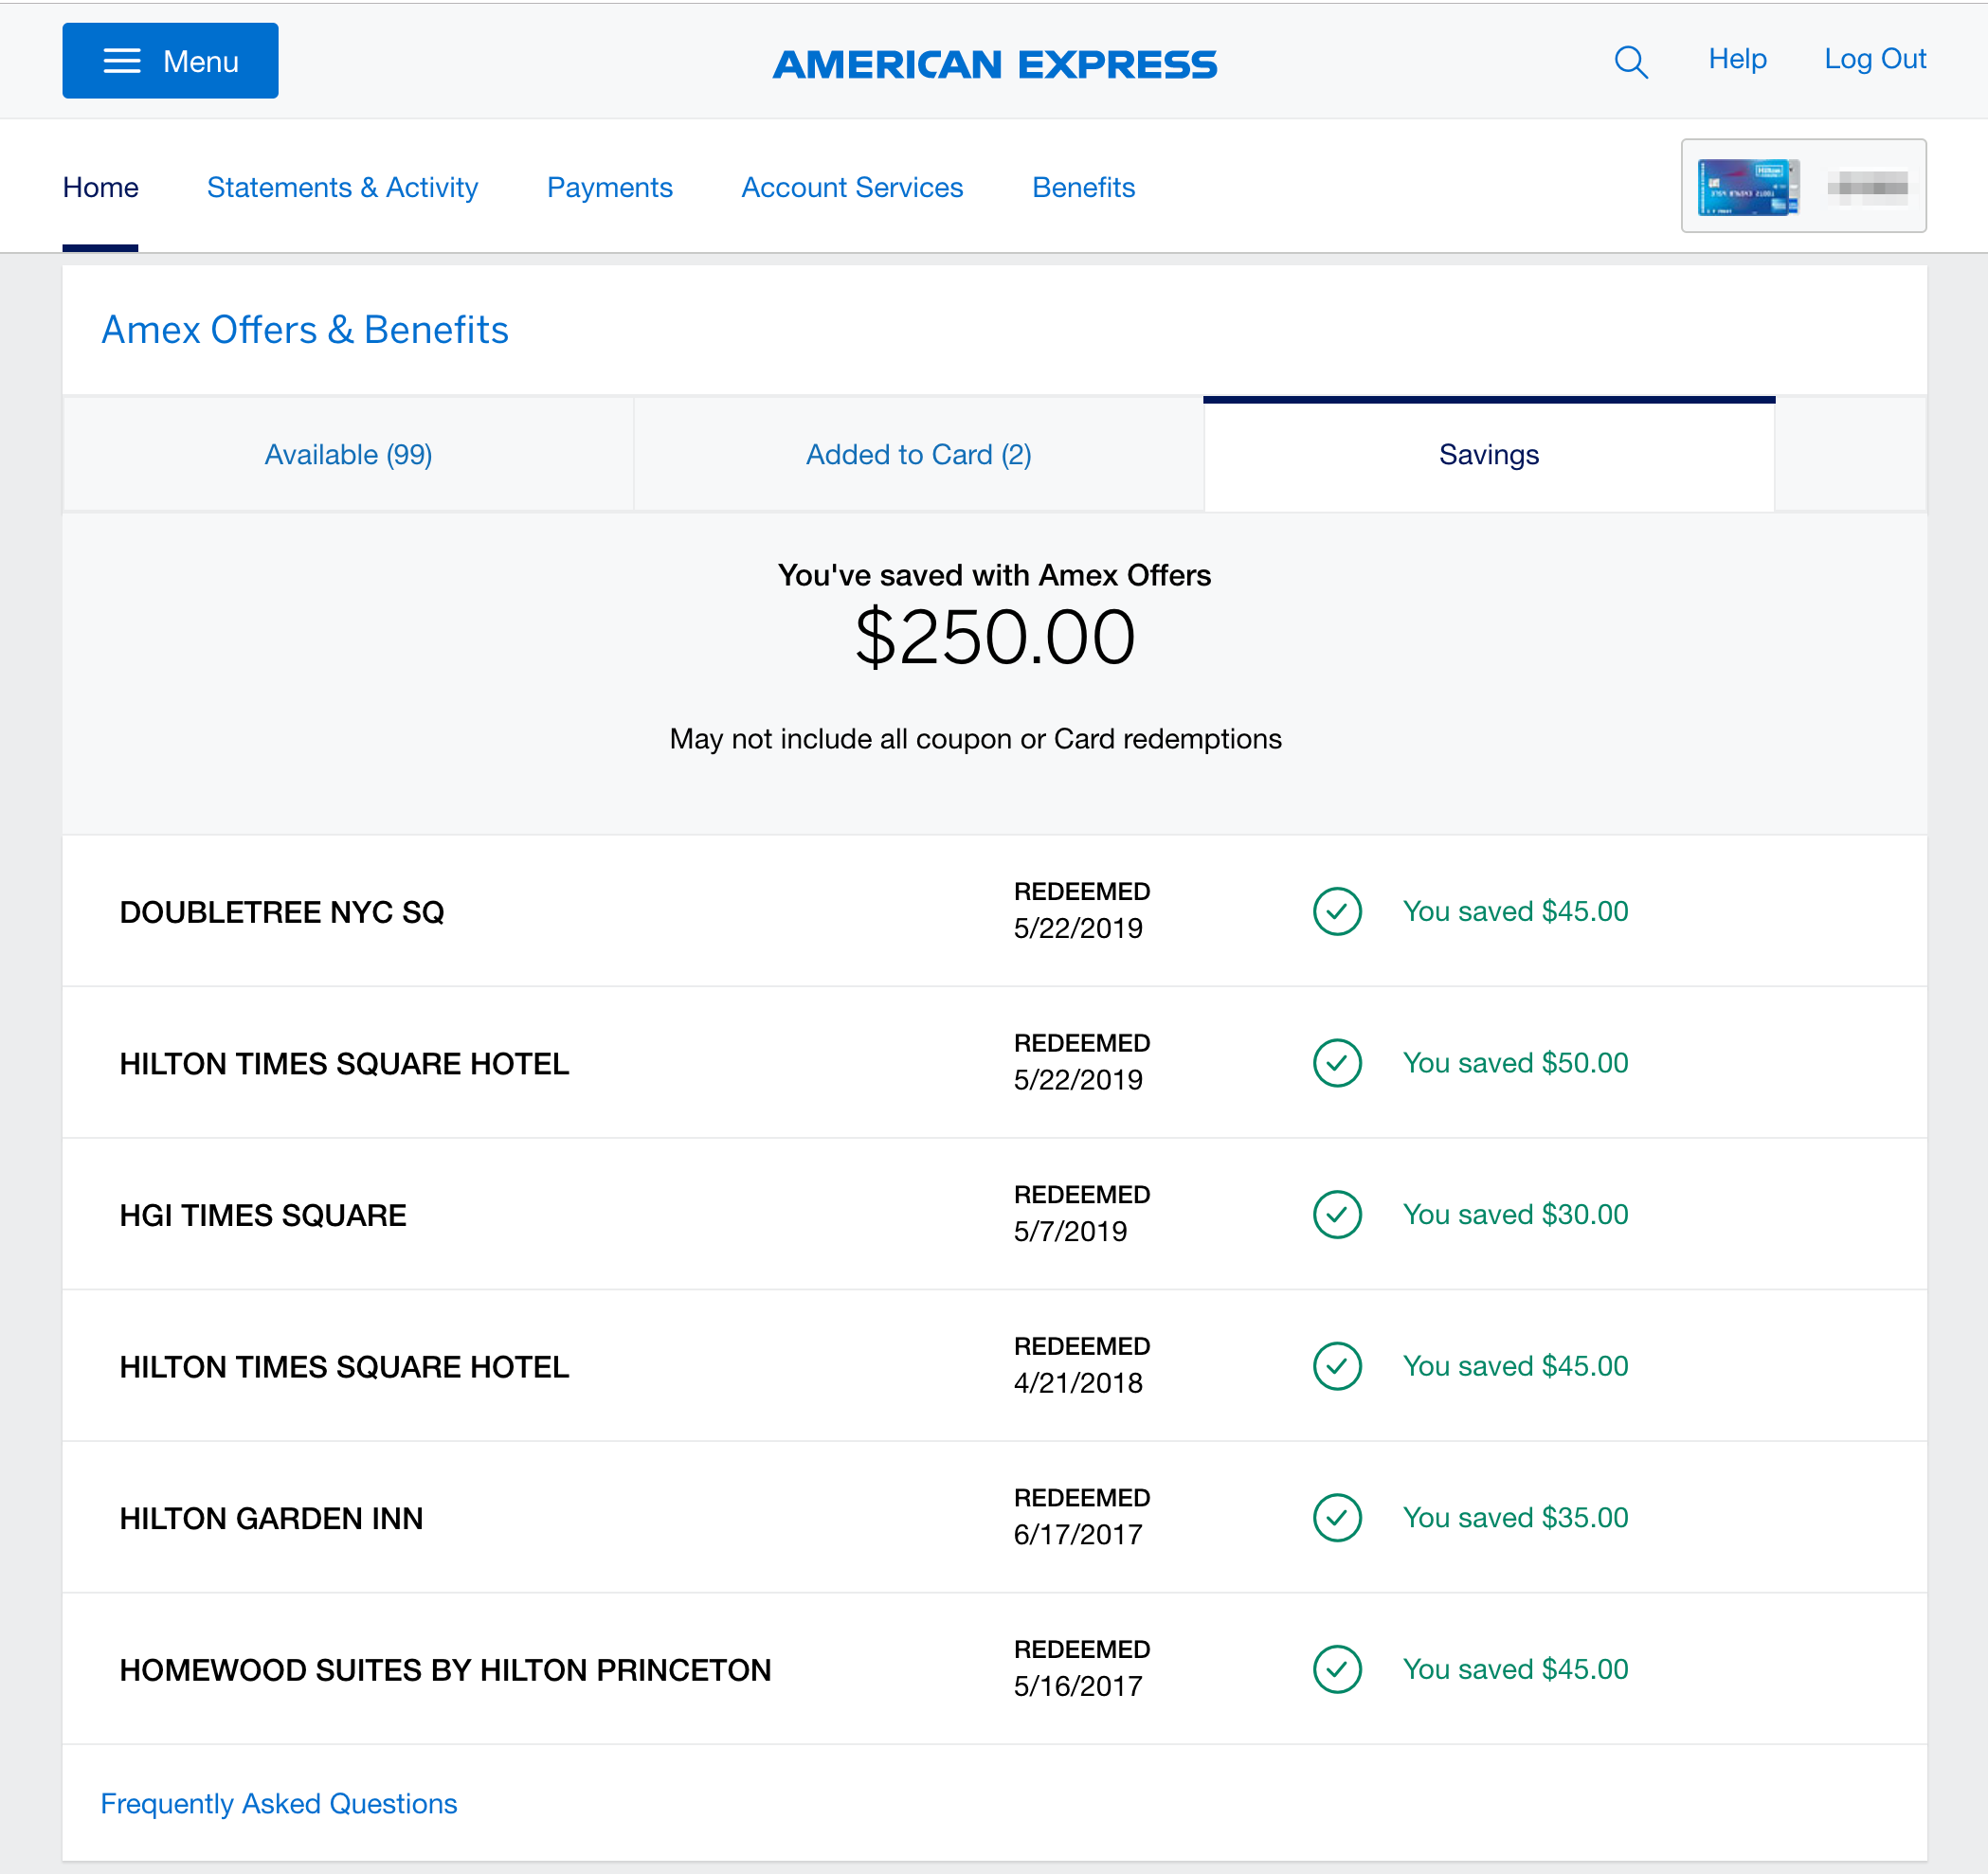 amex-offers-benefits